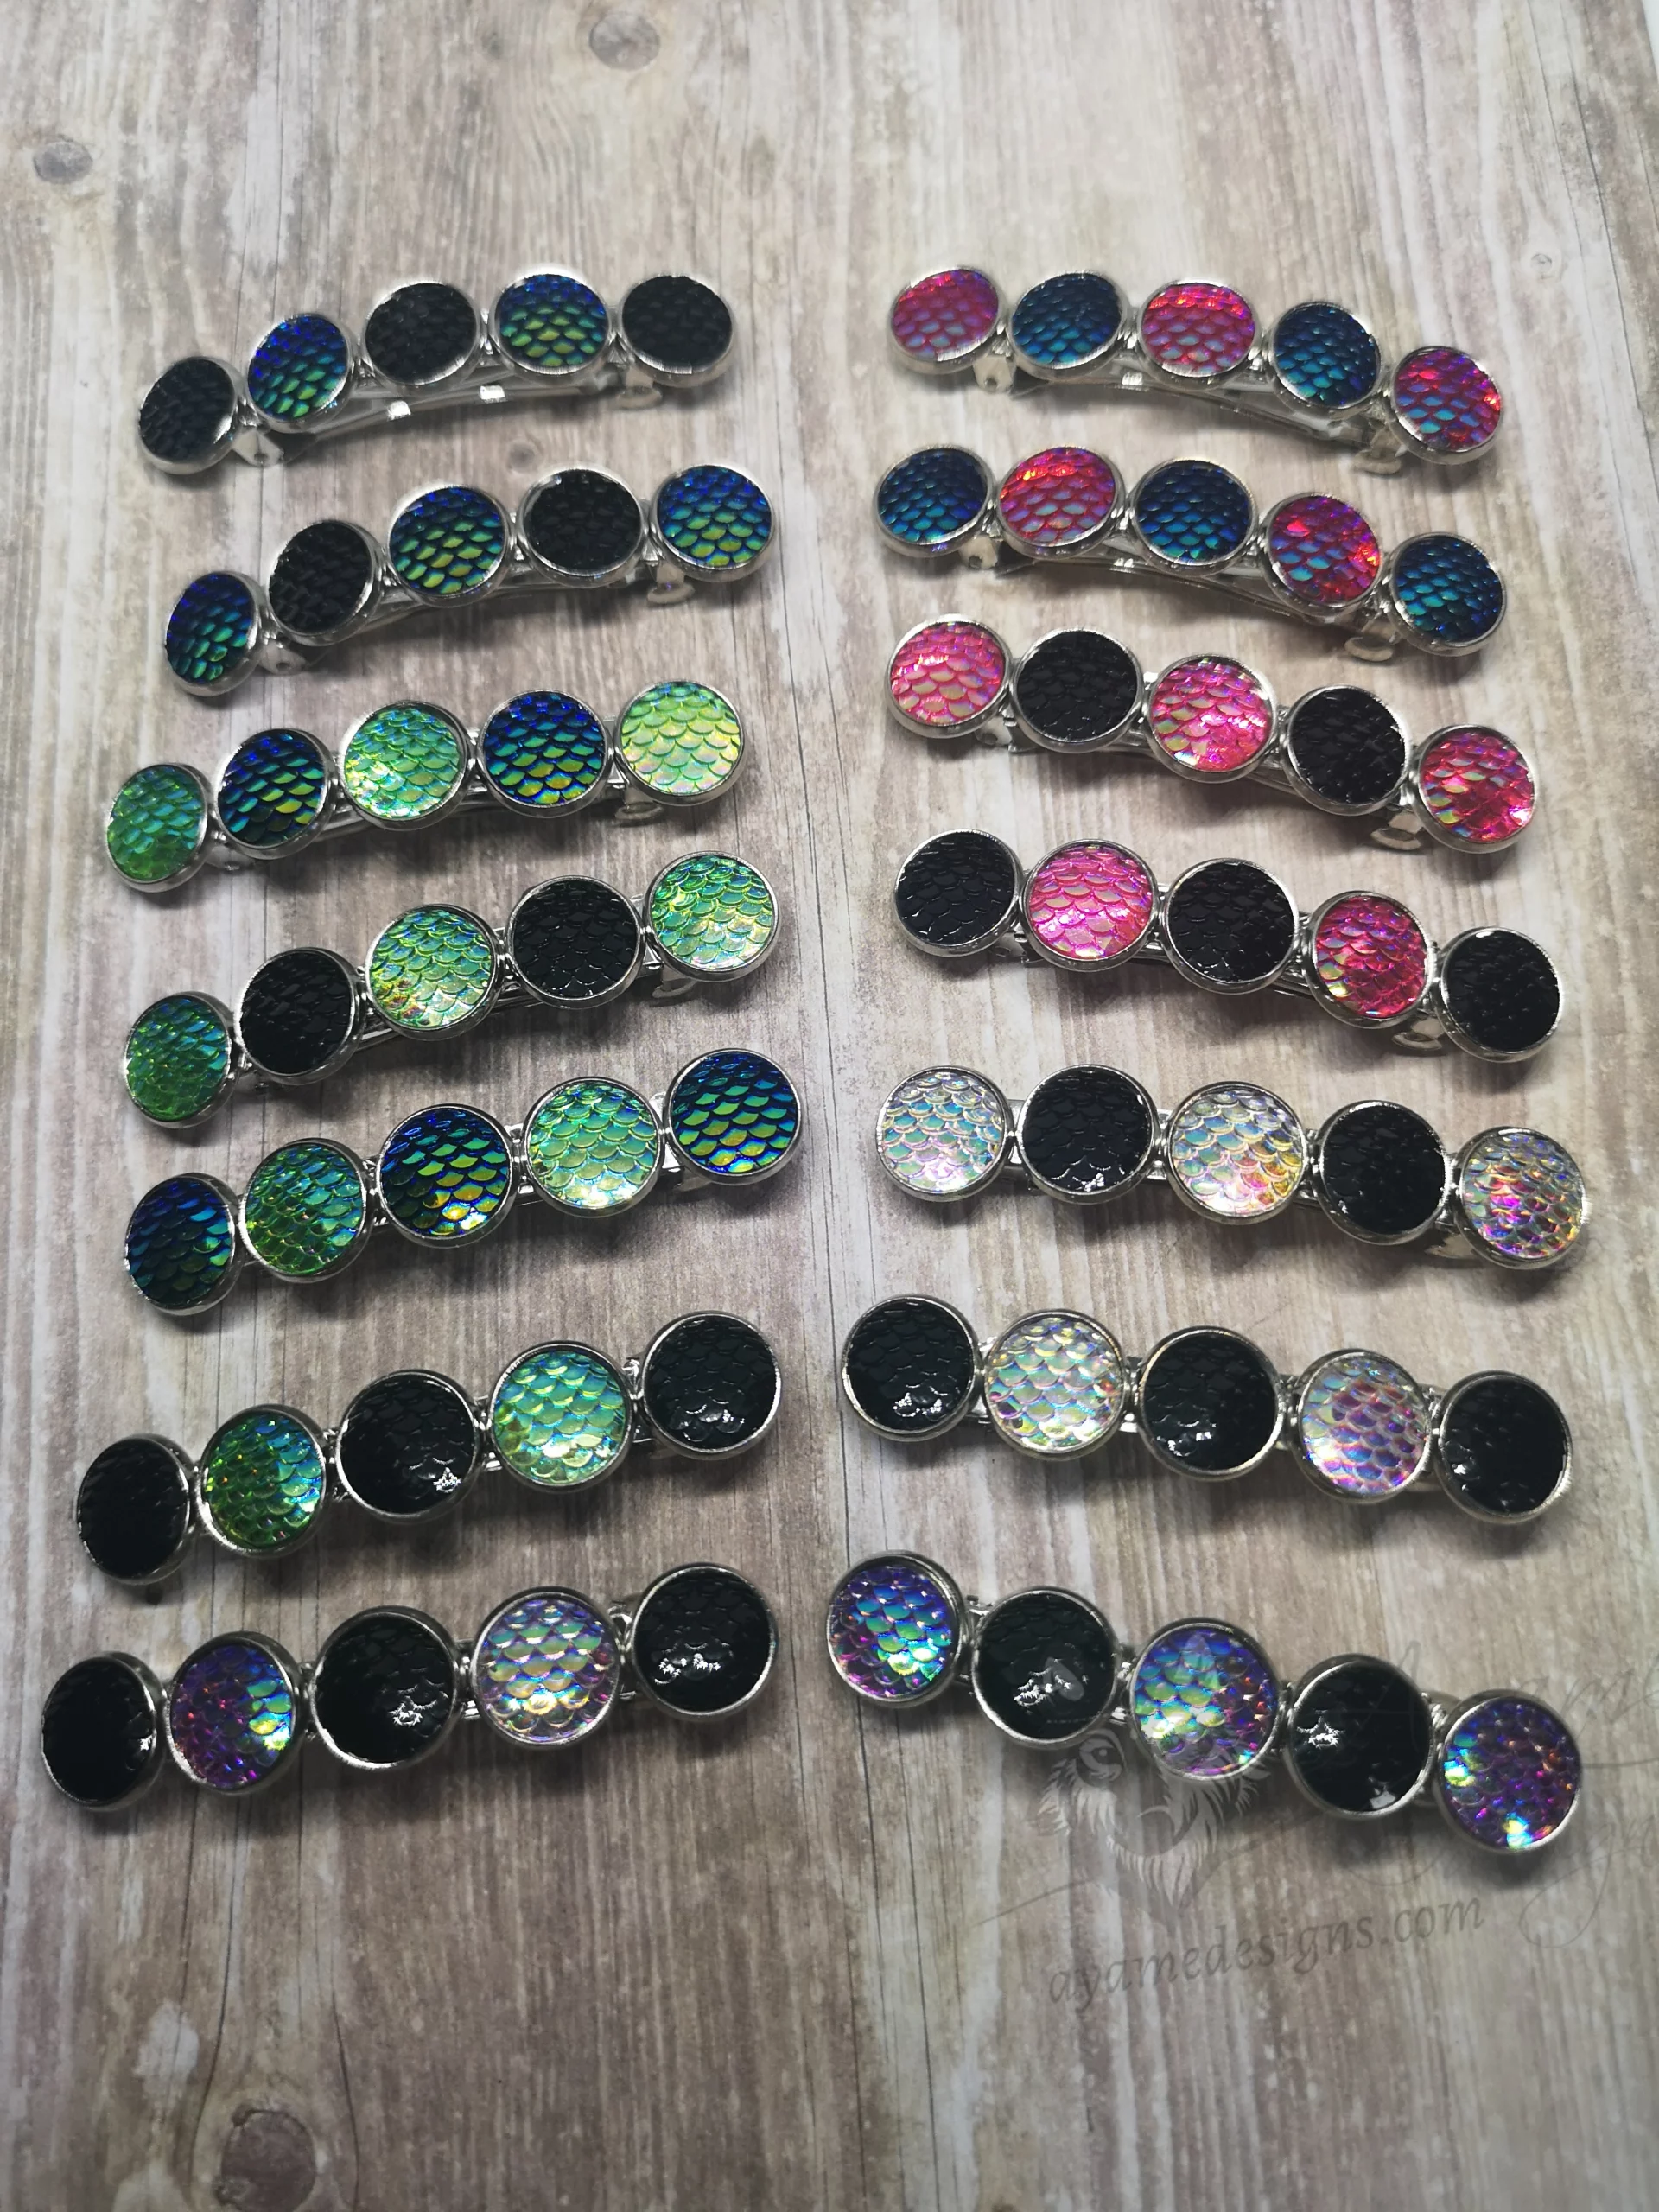 Hair barrettes with resin mermaid scales